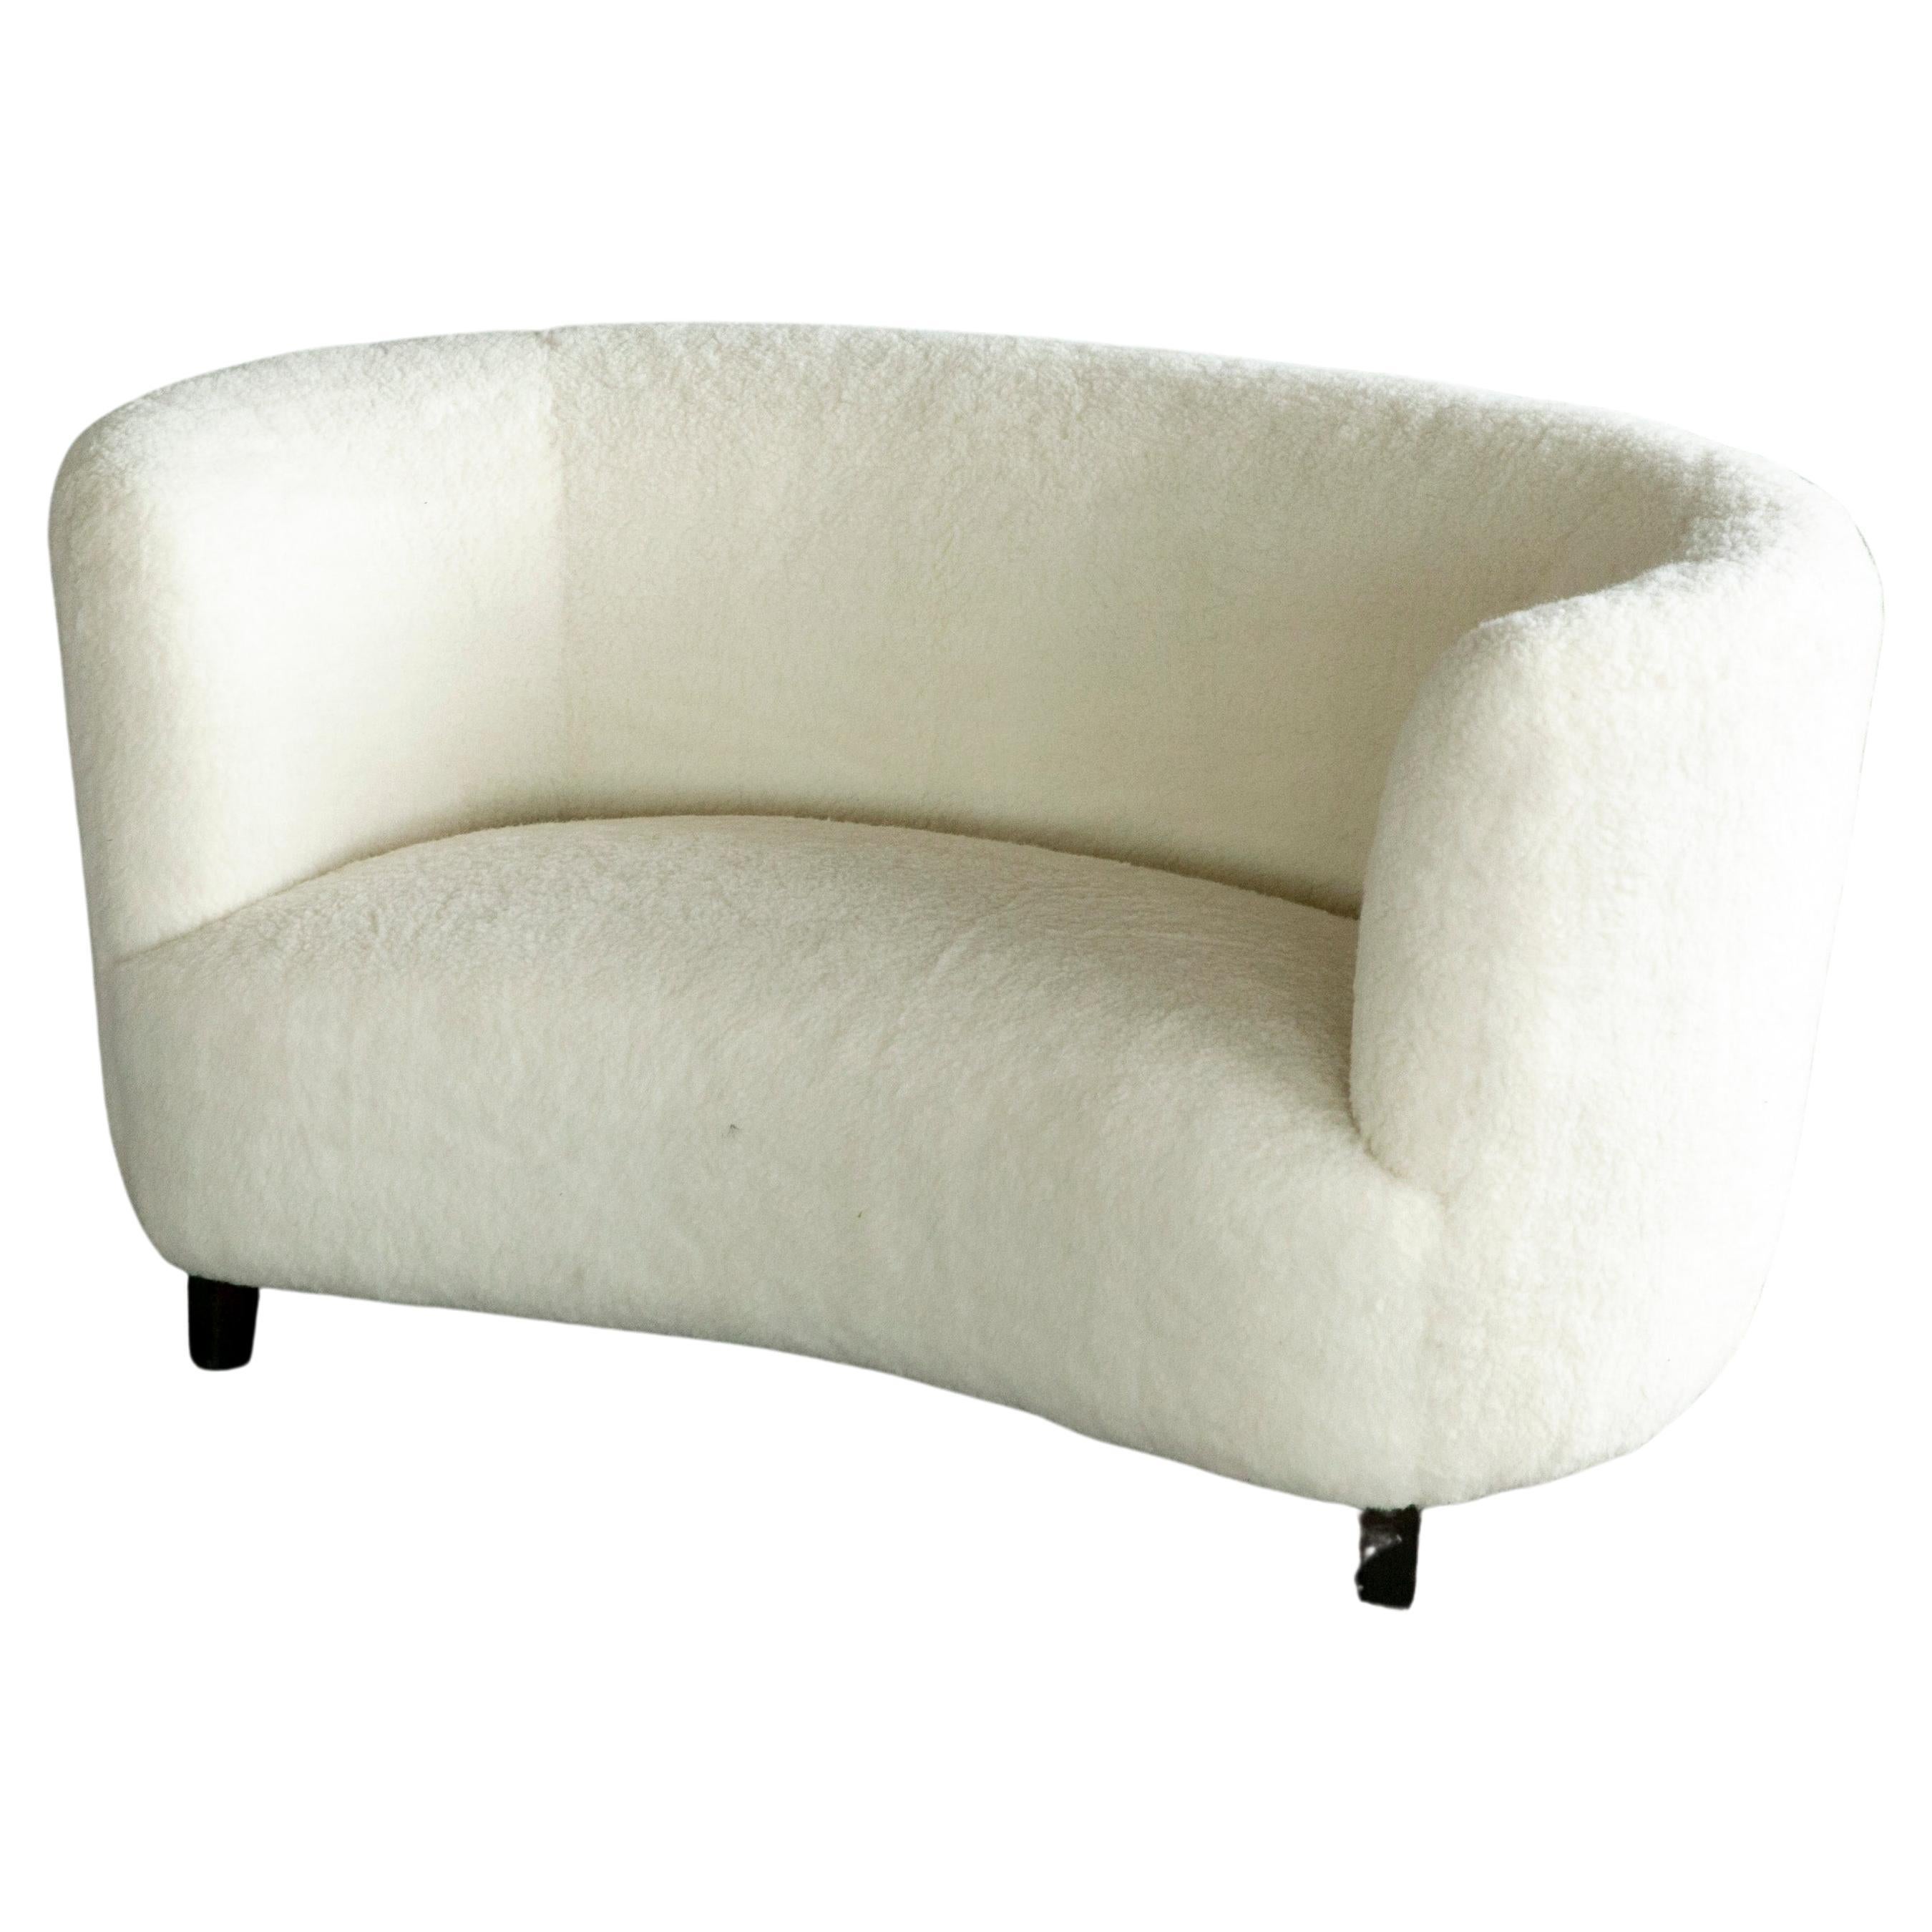 Banana Shaped Curved Loveseat or Sofa Covered in Lambswool Denamrk 1940's